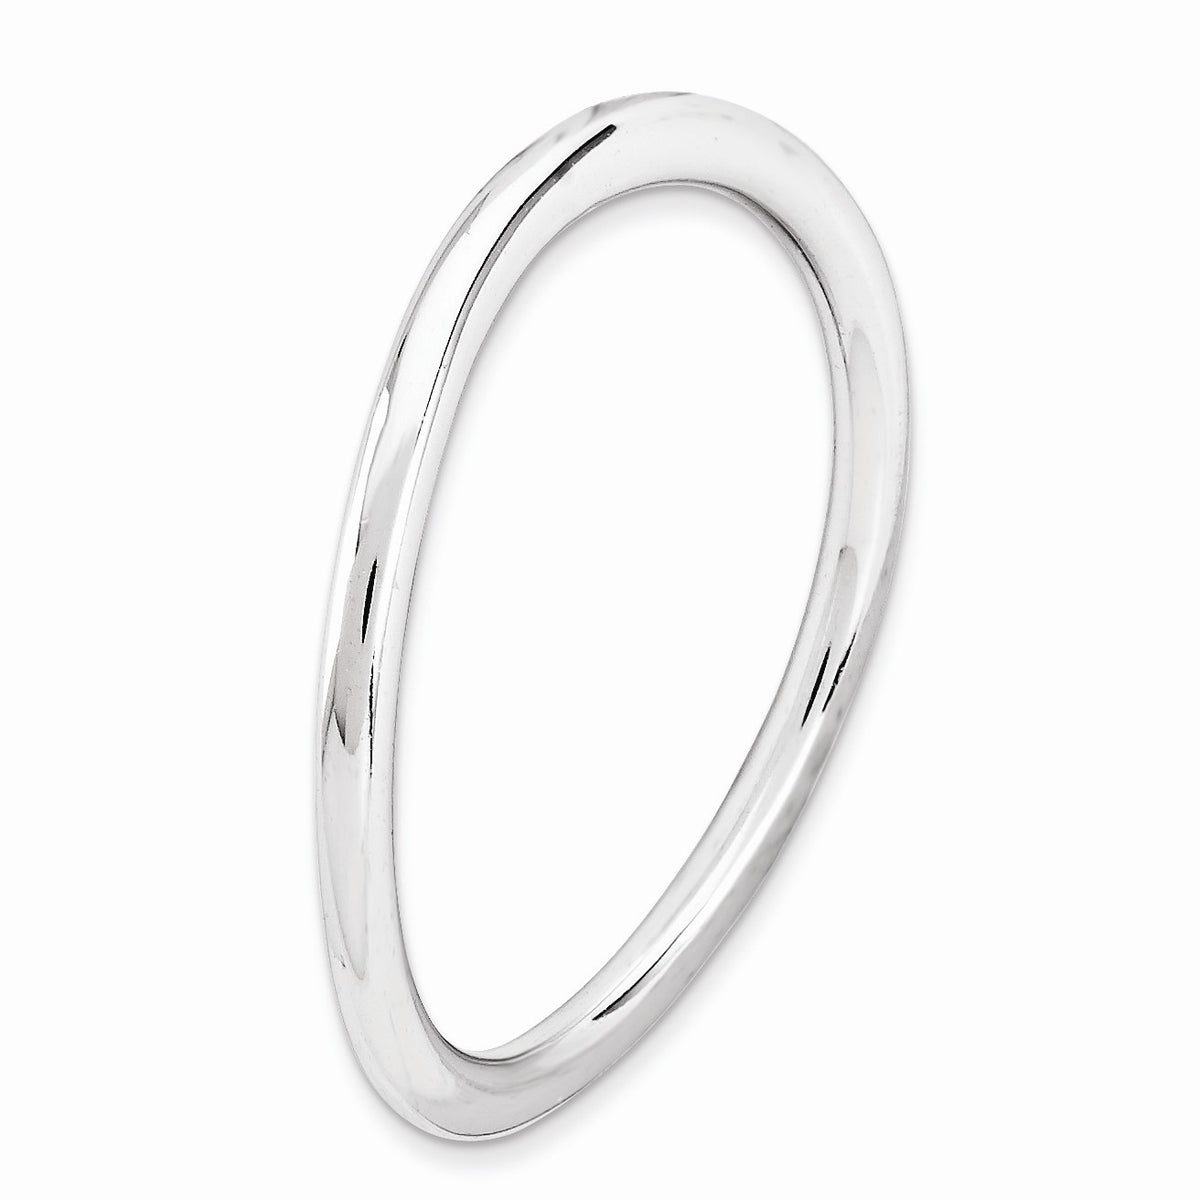 Alternate view of the 1.5mm Stackable Sterling Silver Curved Smooth Band by The Black Bow Jewelry Co.